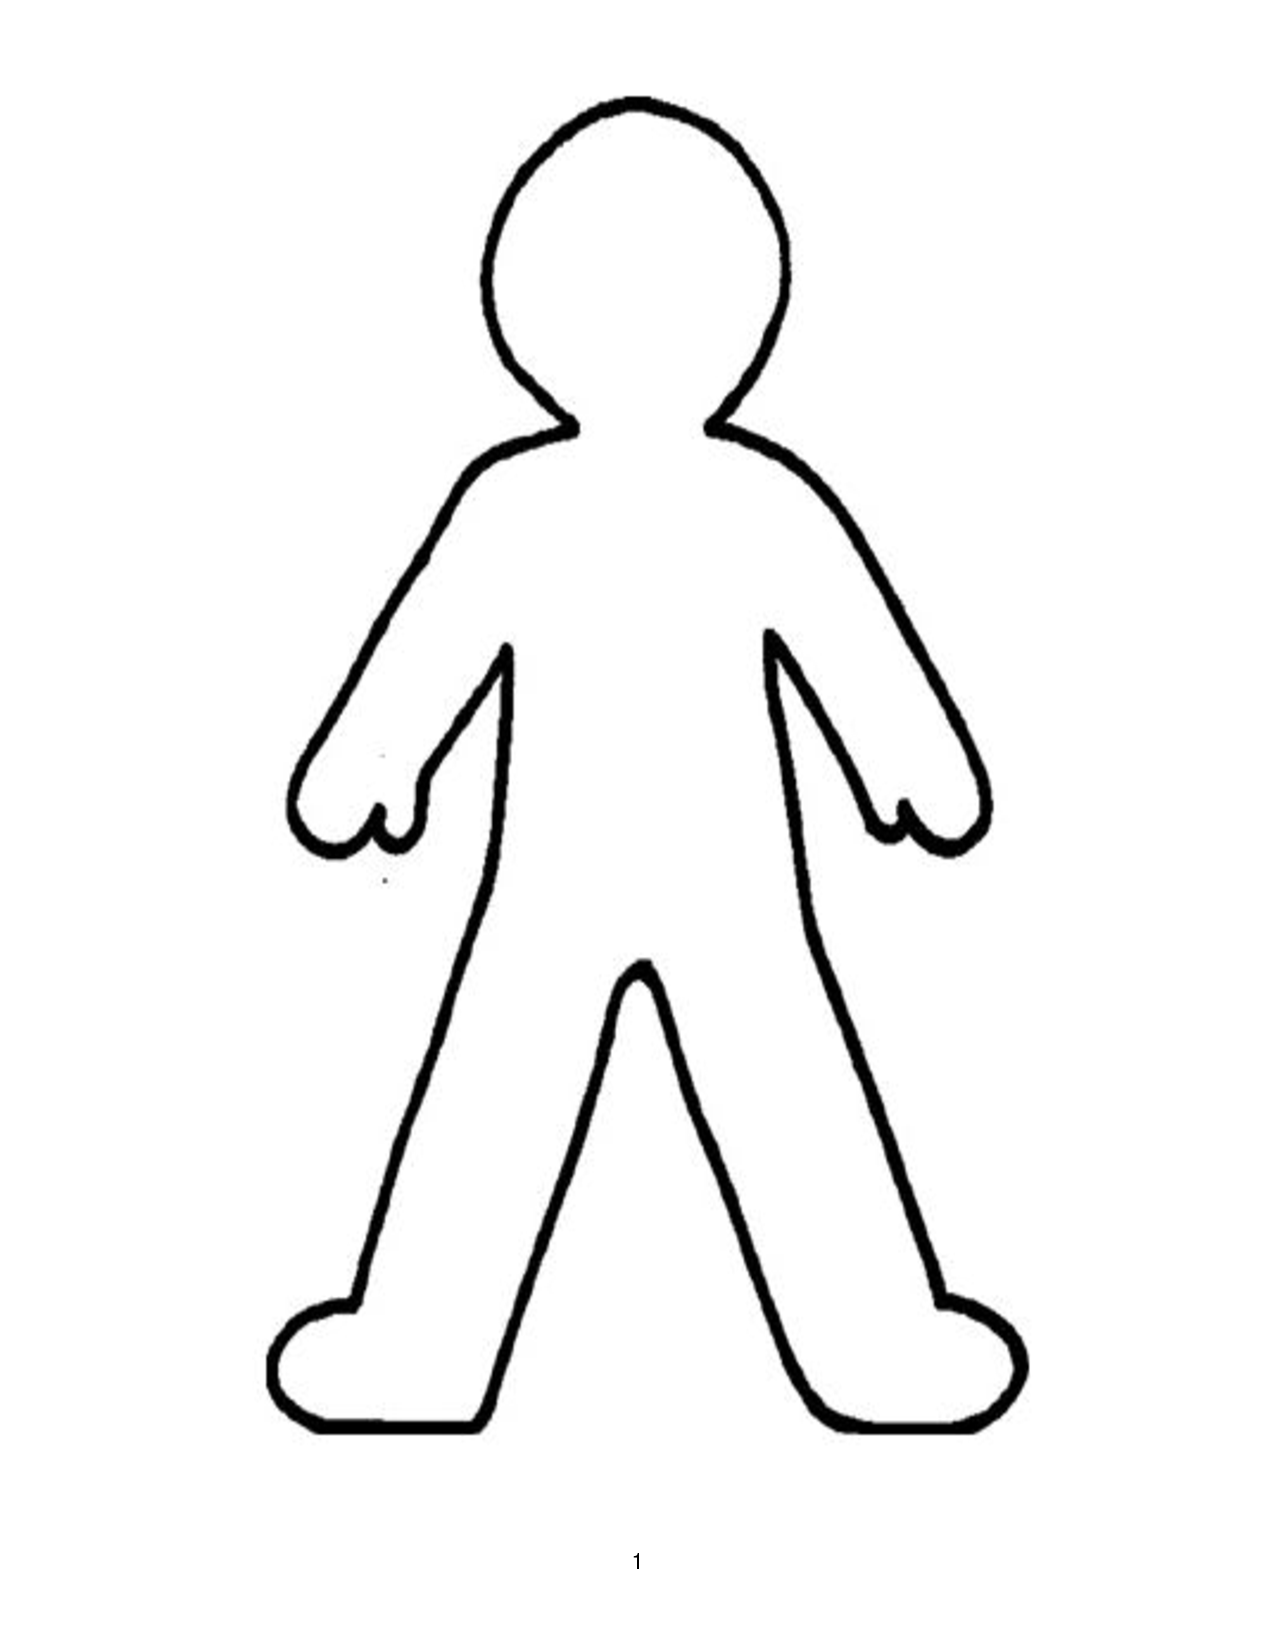 Outline Drawings Of People | Free Download Clip Art | Free Clip ...